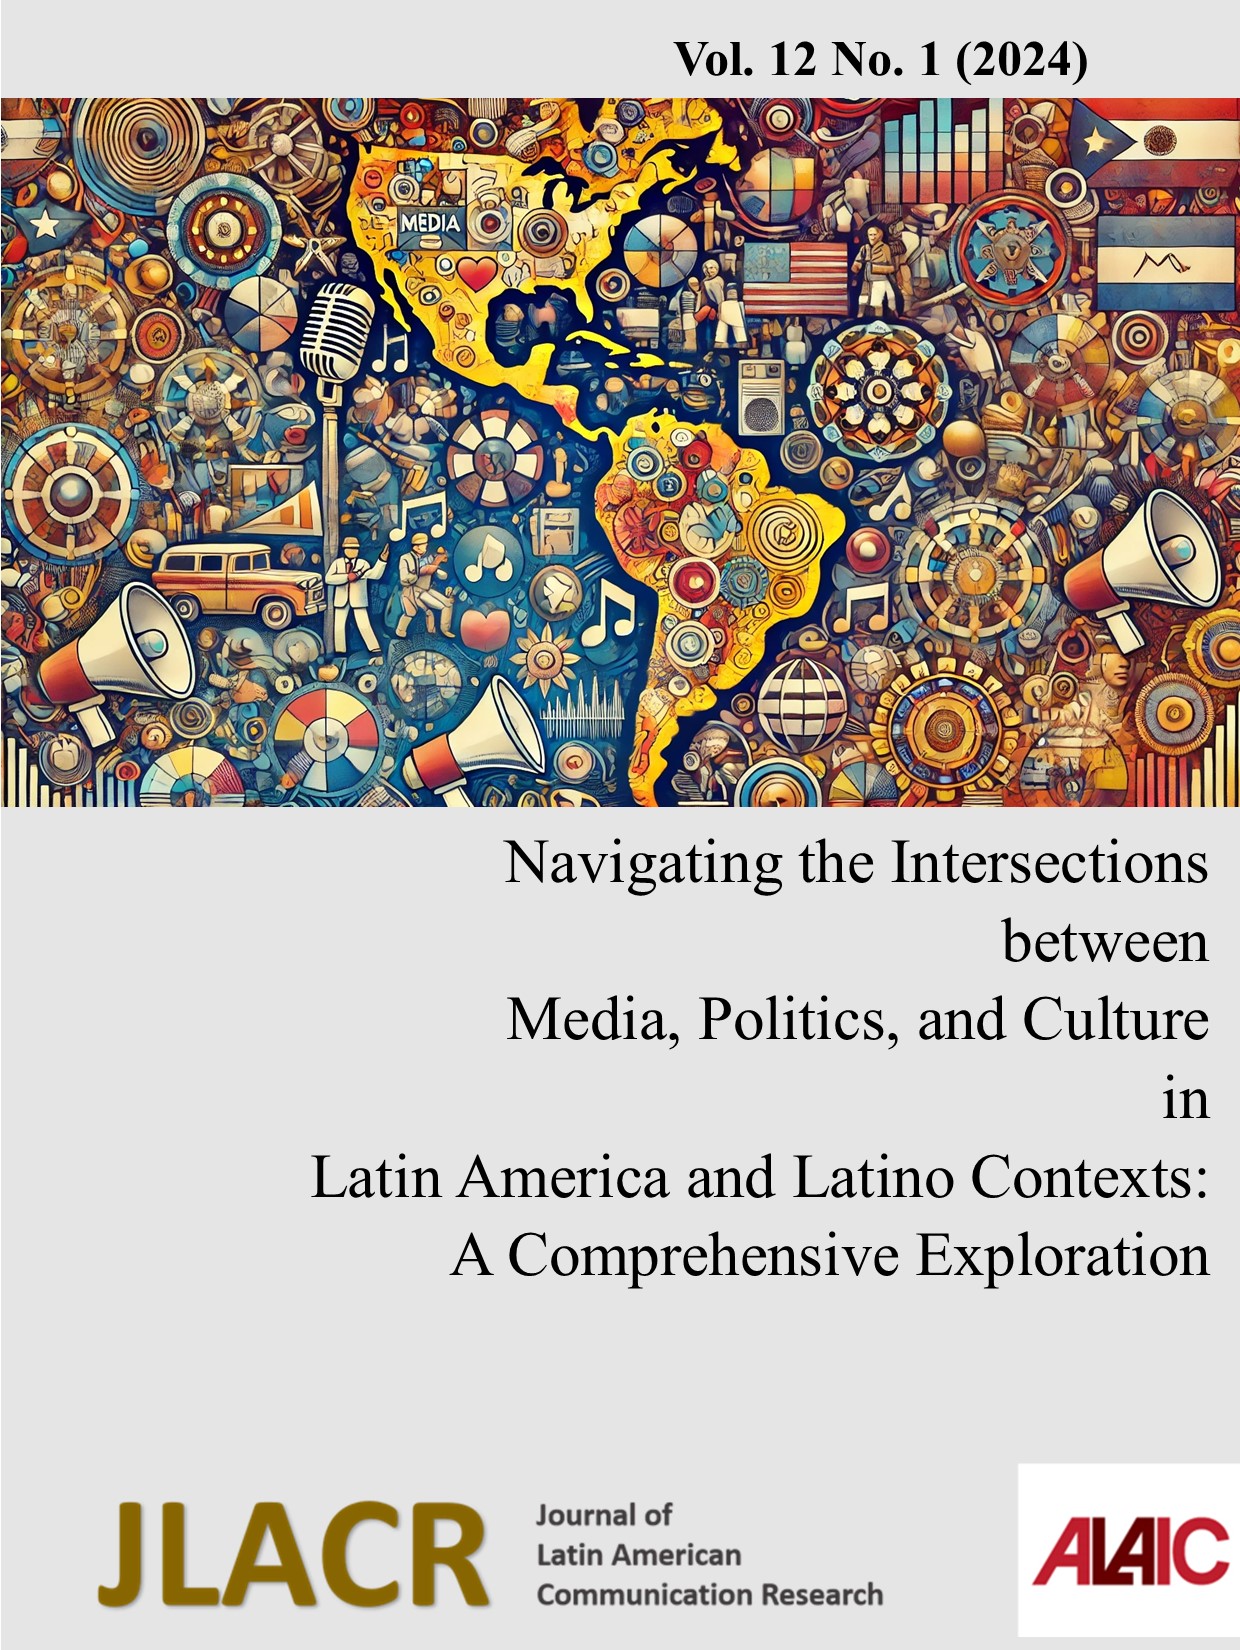 					Visualizar v. 12 n. 1 (2024): Navigating the Intersections between Media, Politics, and Culture in Latin America and Latino Contexts: A Comprehensive Exploration
				